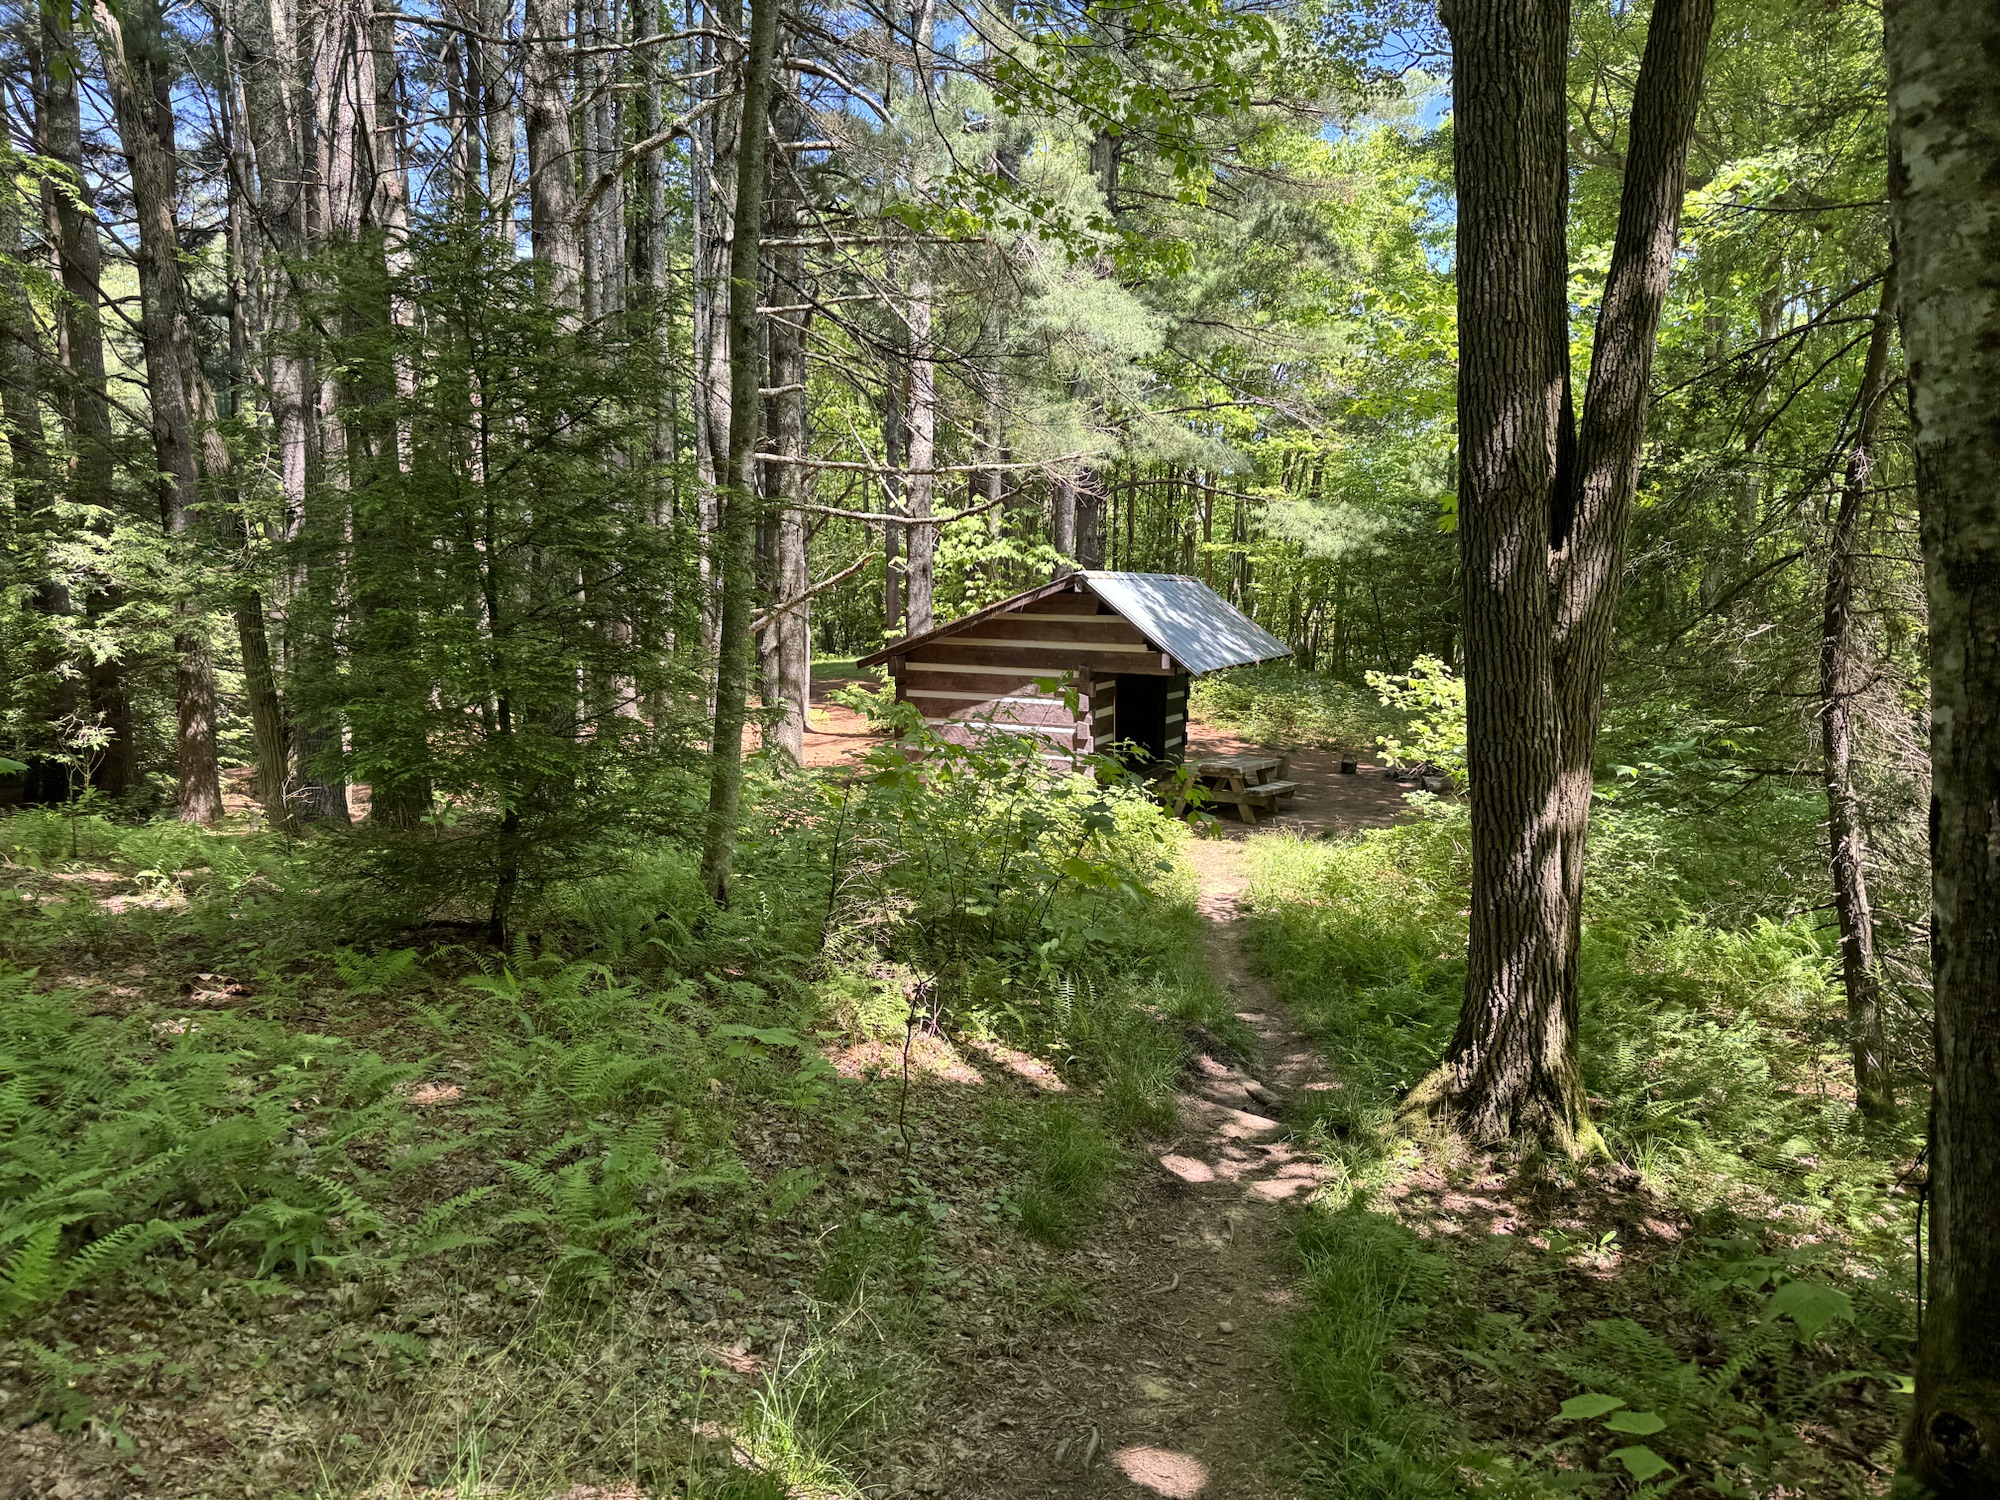 Day 40 – stealth site at 477 to Lost Mountain Shelter